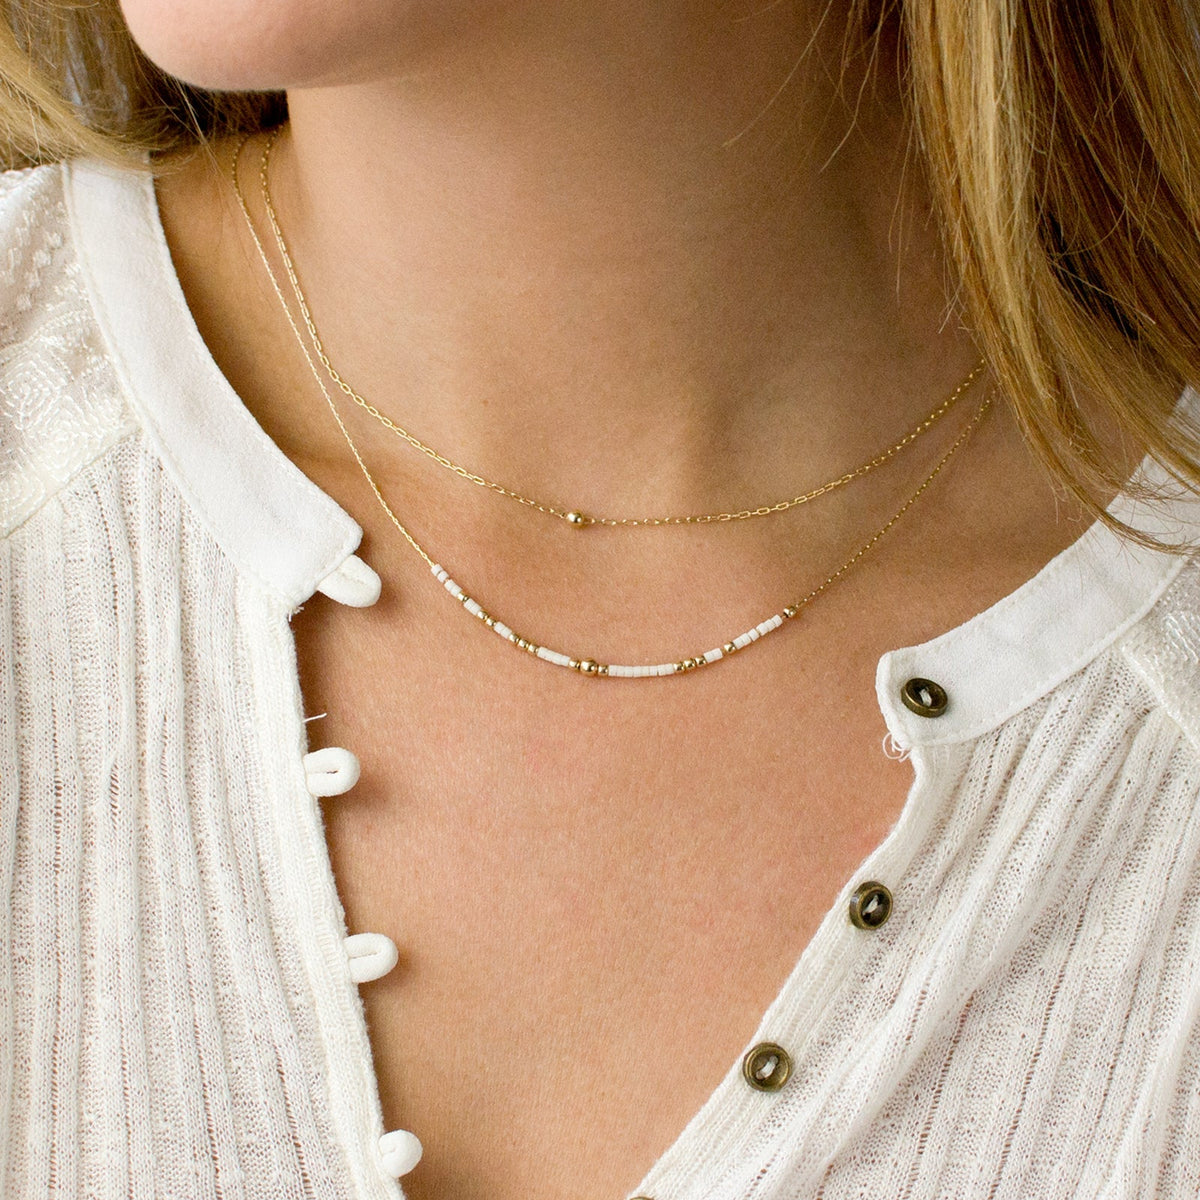 Morse Code Necklace - Besties Collection